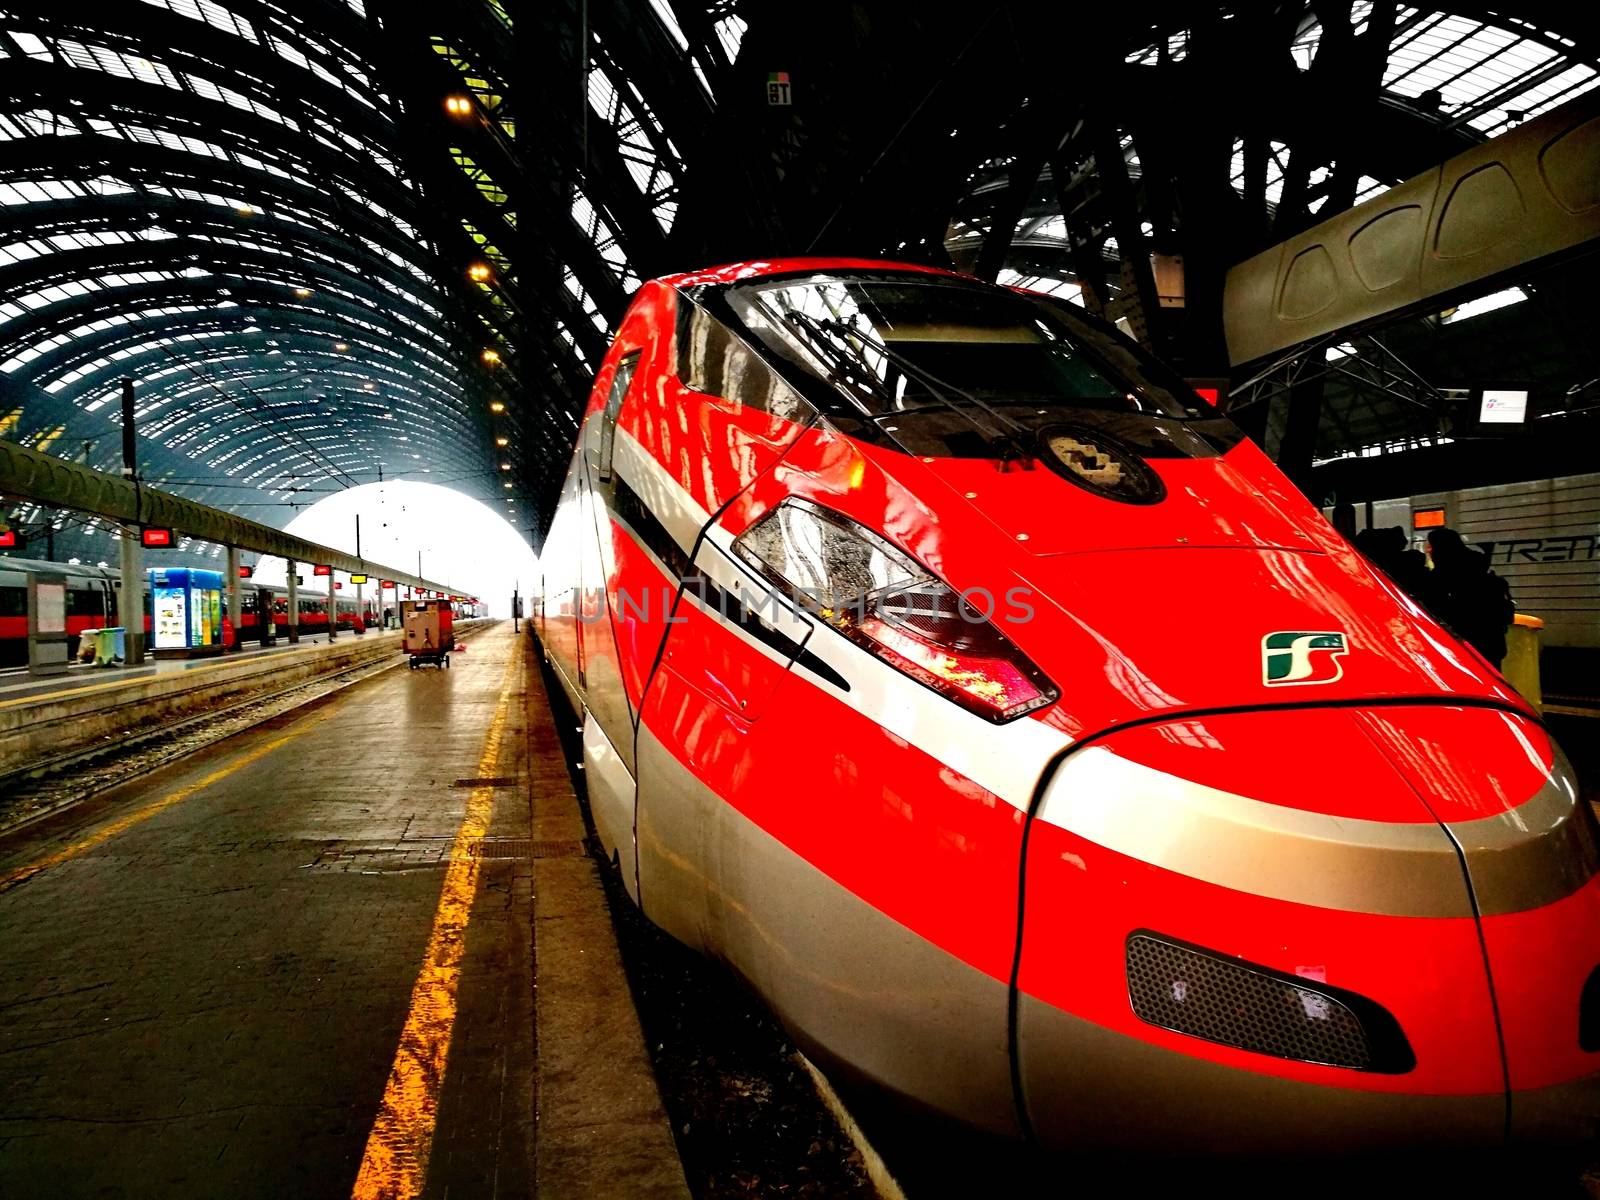 Red High Speed Train in Milan Central Station by EnricoMiglnoPhotography